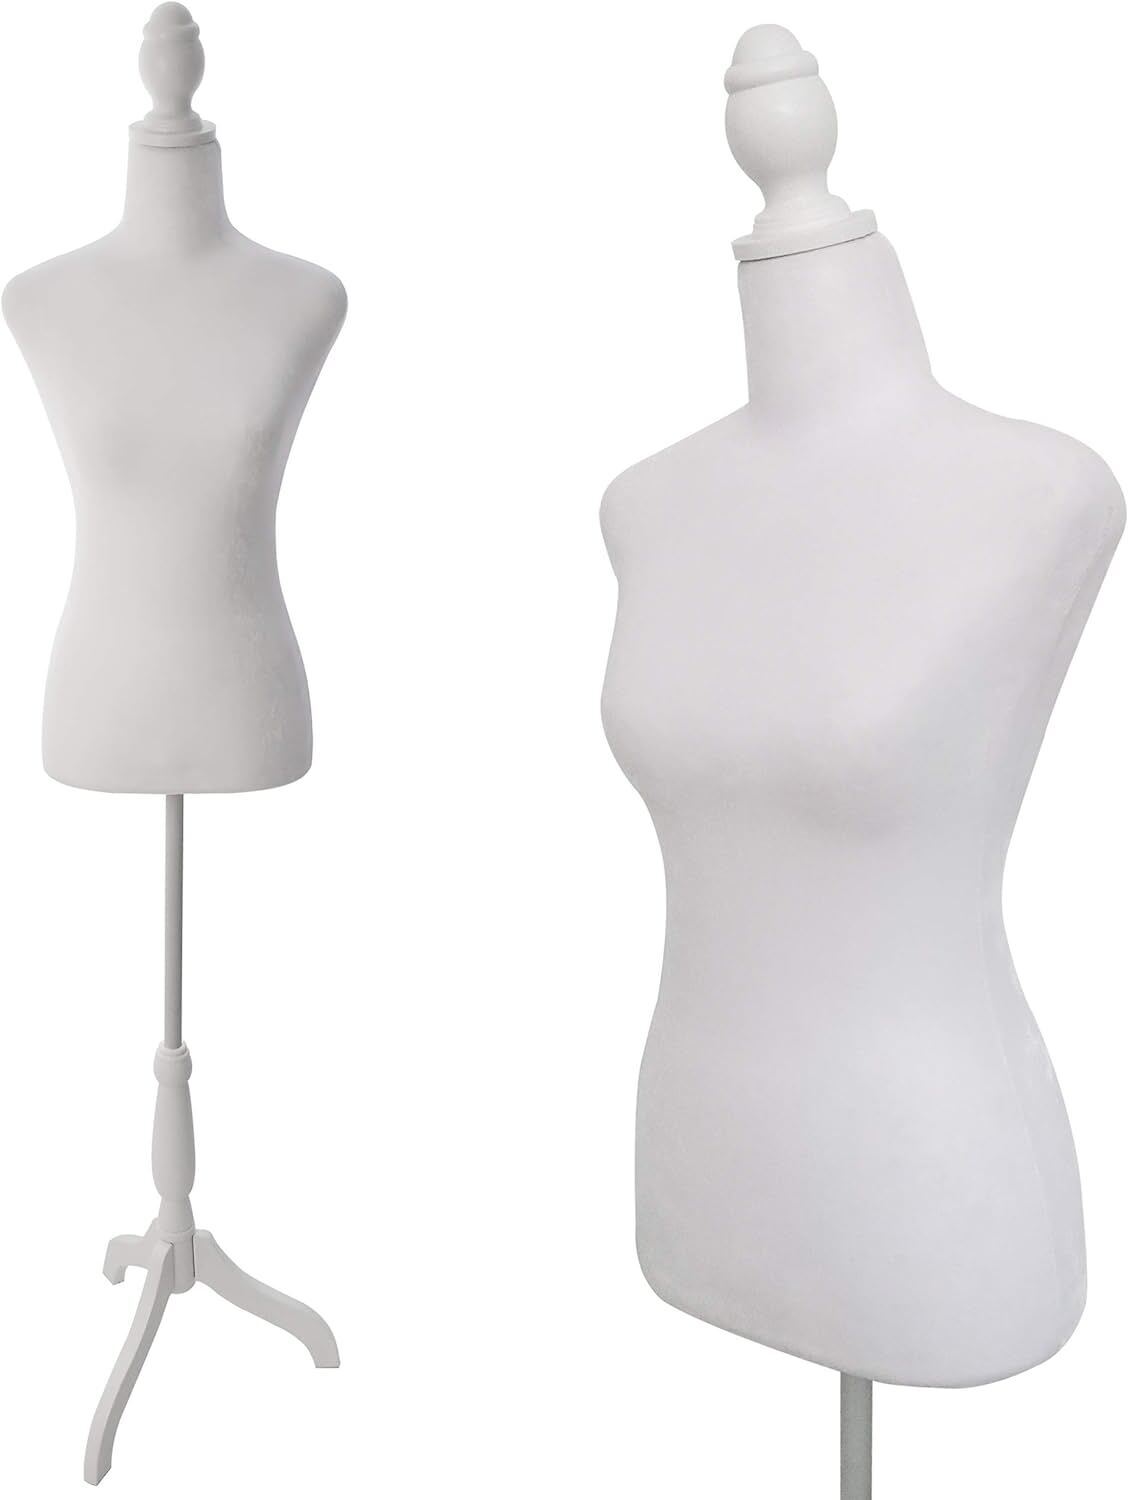 White Female Mannequin Torso Body with Adjustable Tripod Stand Dress Display